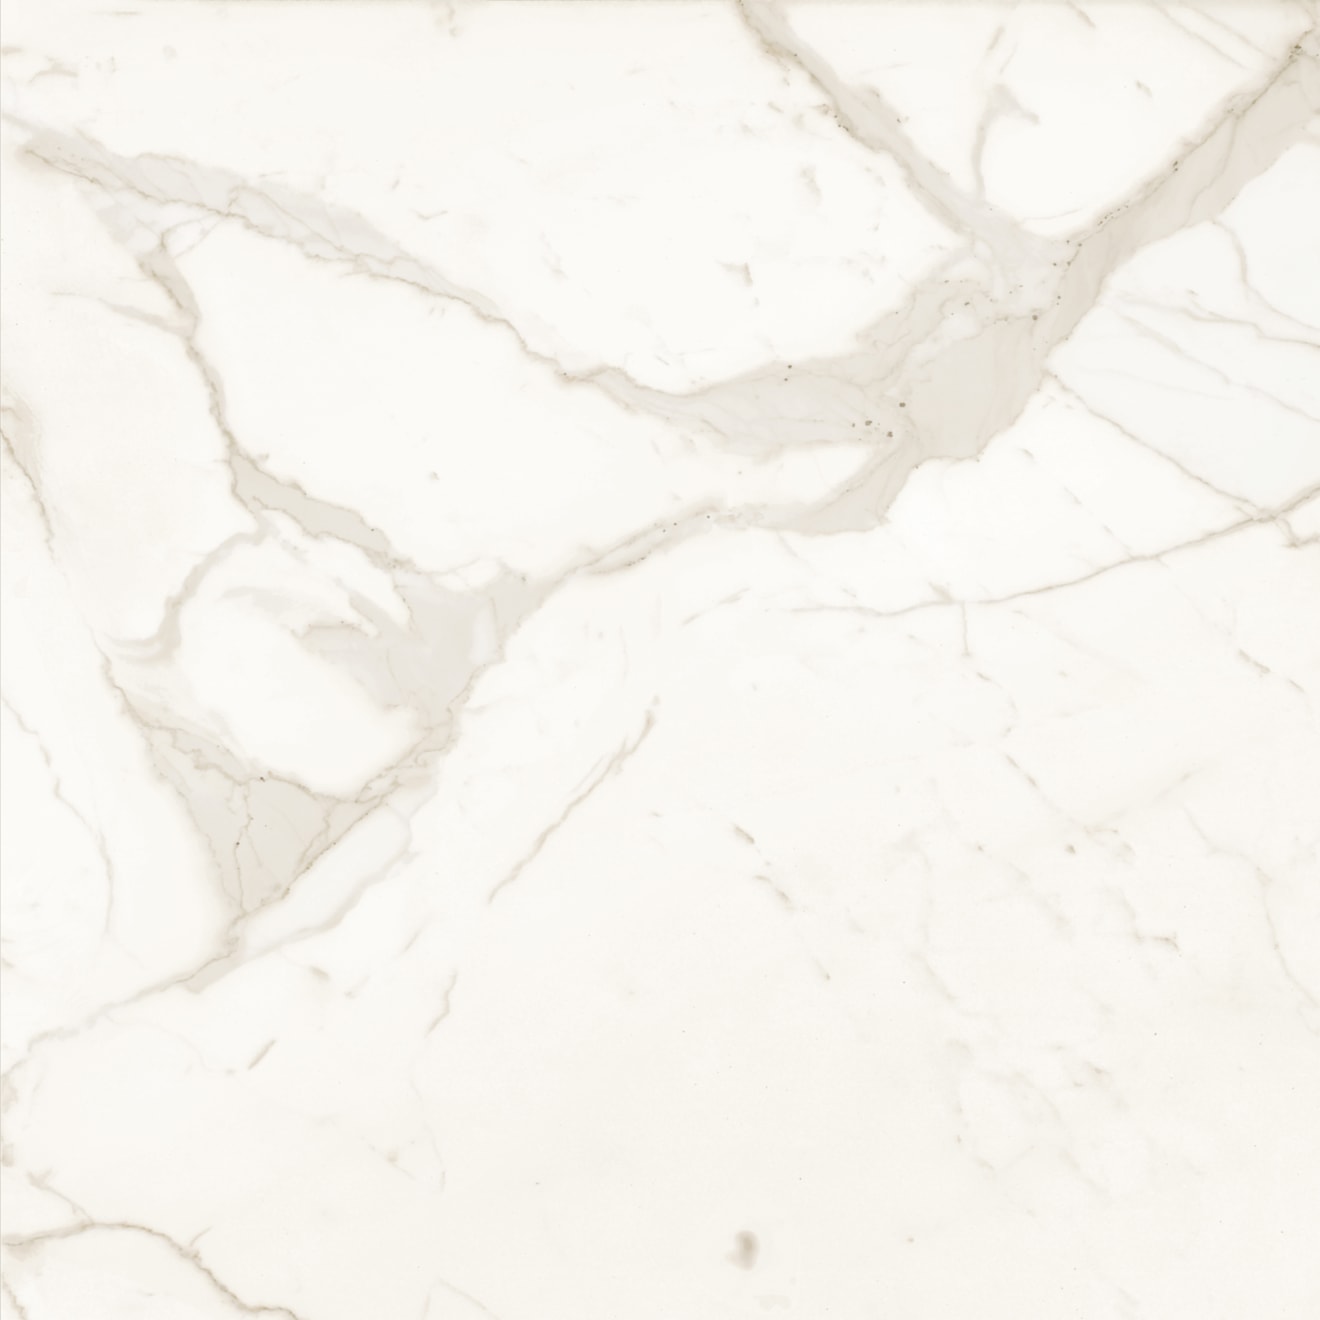 Magnifica The Thirties 30" x 30" - 8mm Polished Porcelain Tile in Calacatta Super White | Bedrosians Tile & Stone